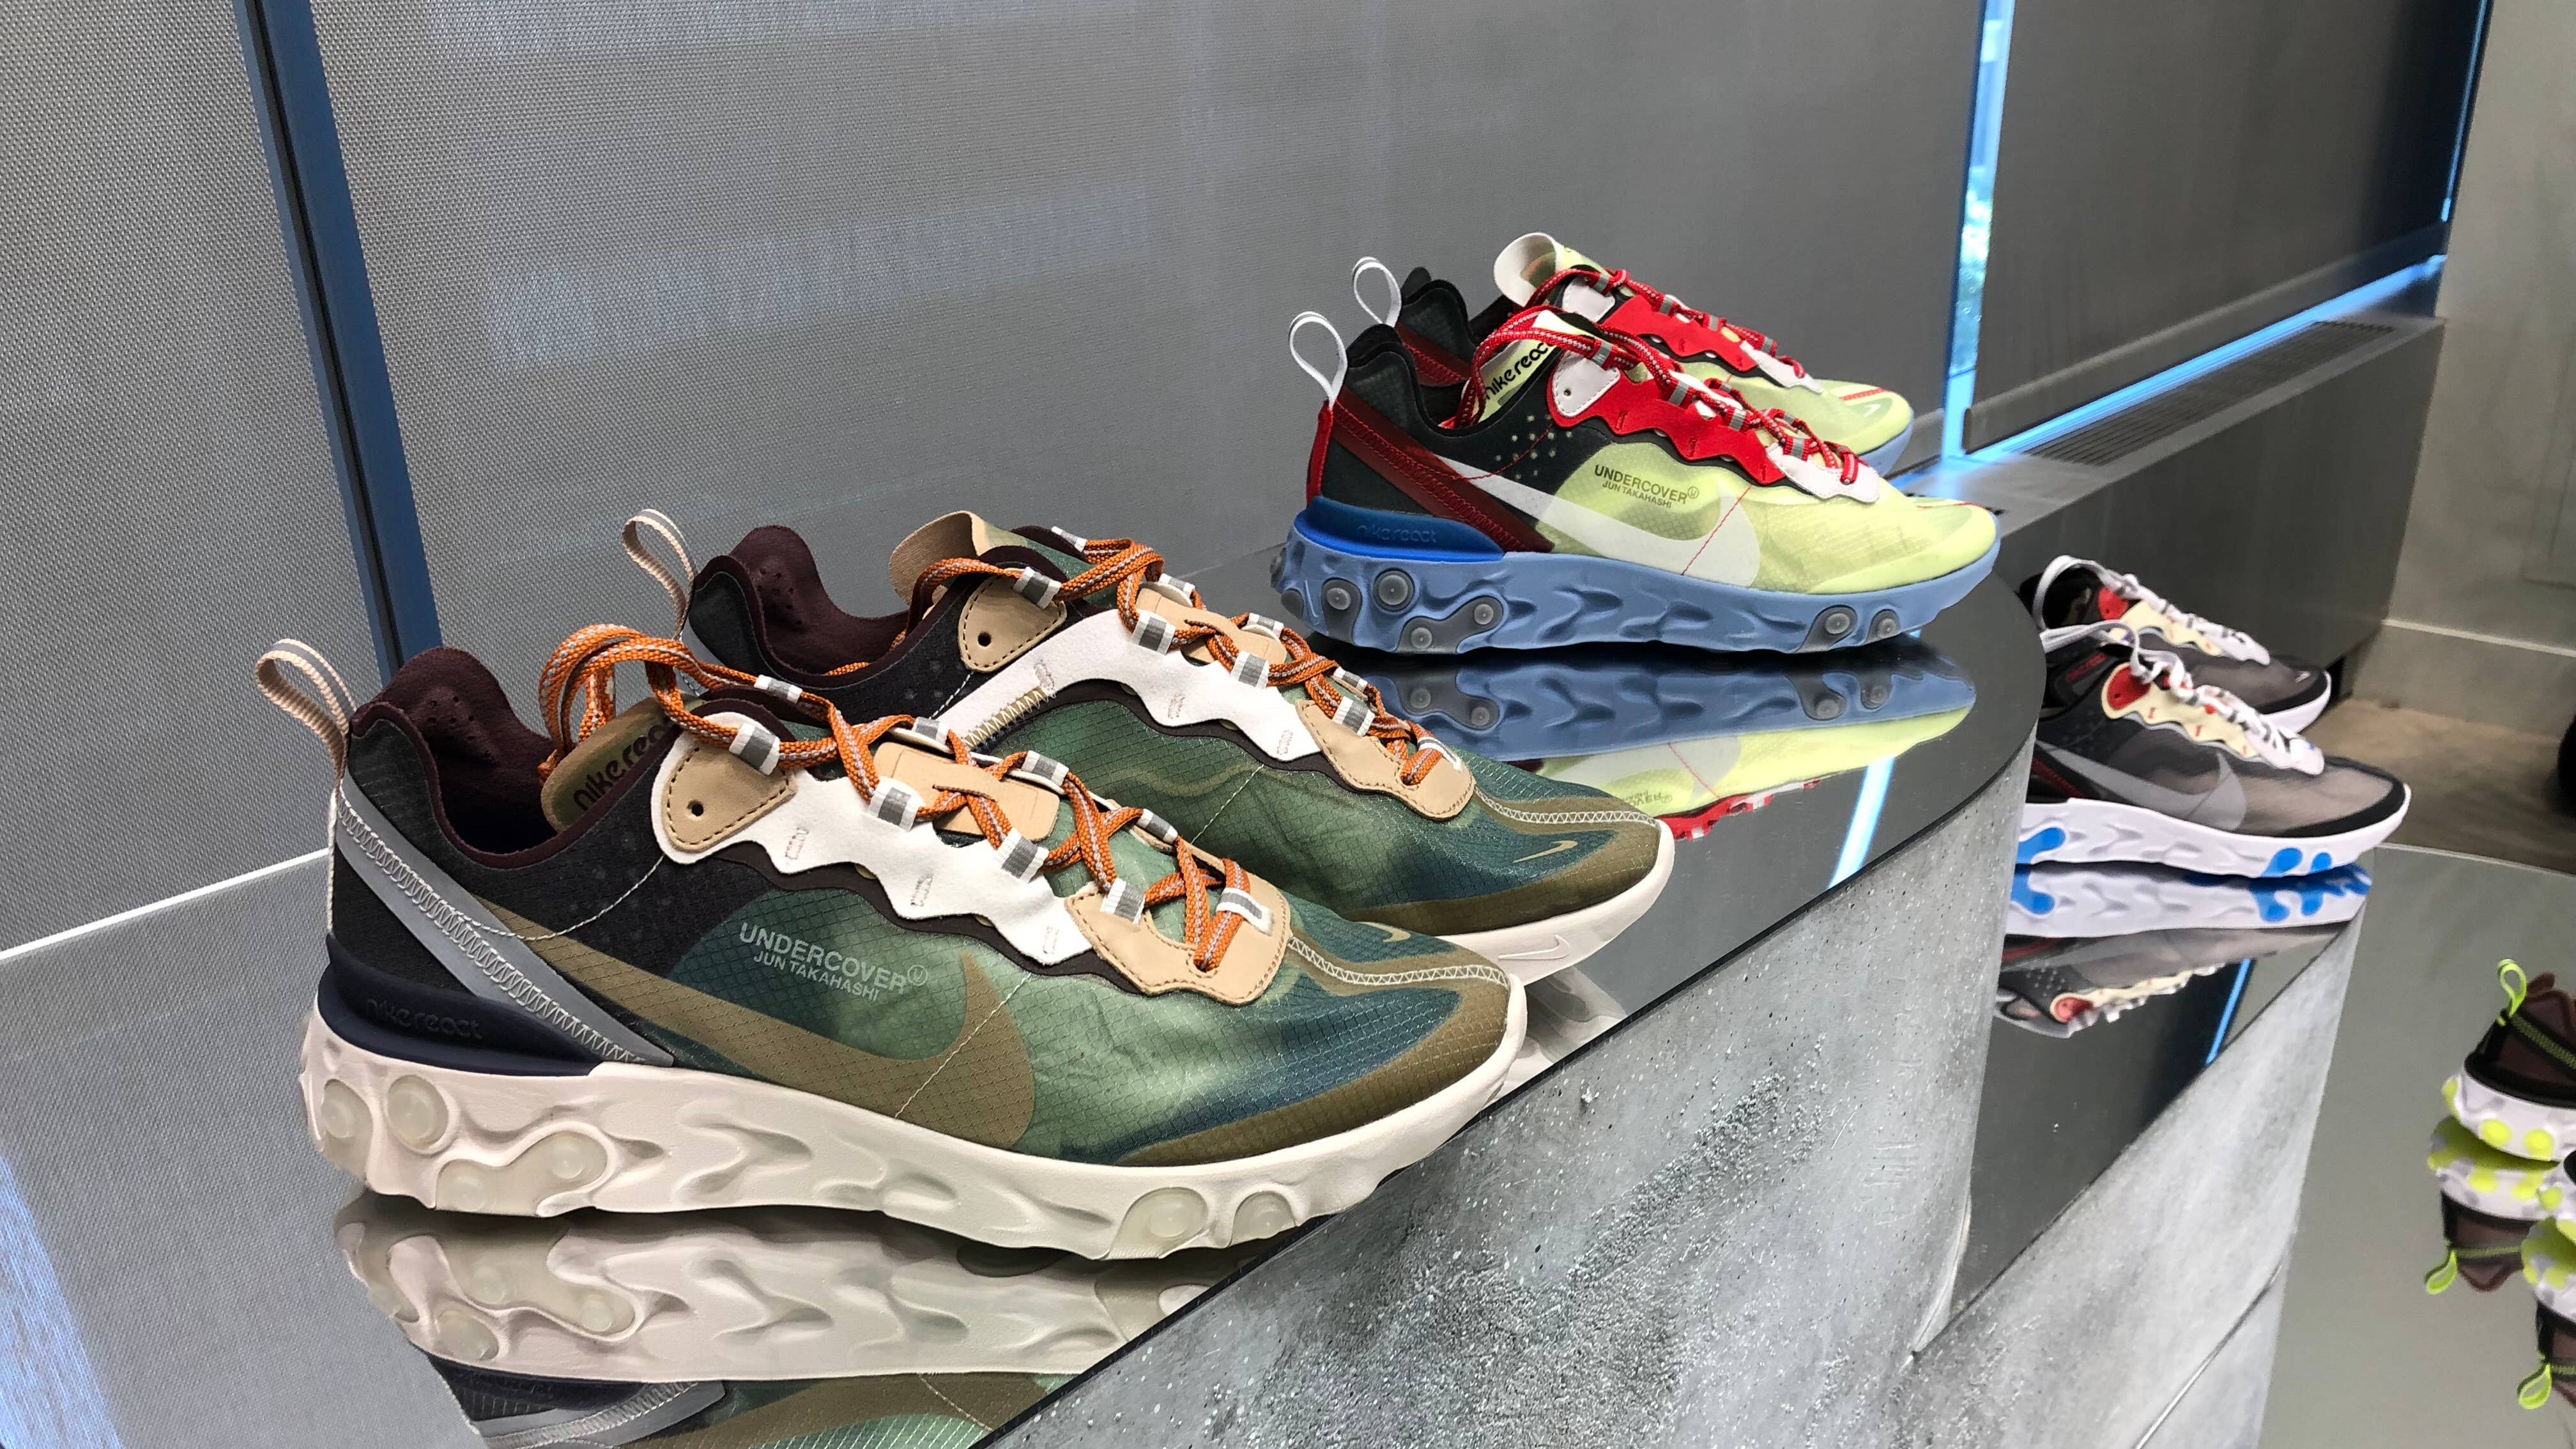 UNDERCOVER Reveals Nike React Element 87 Collaboration